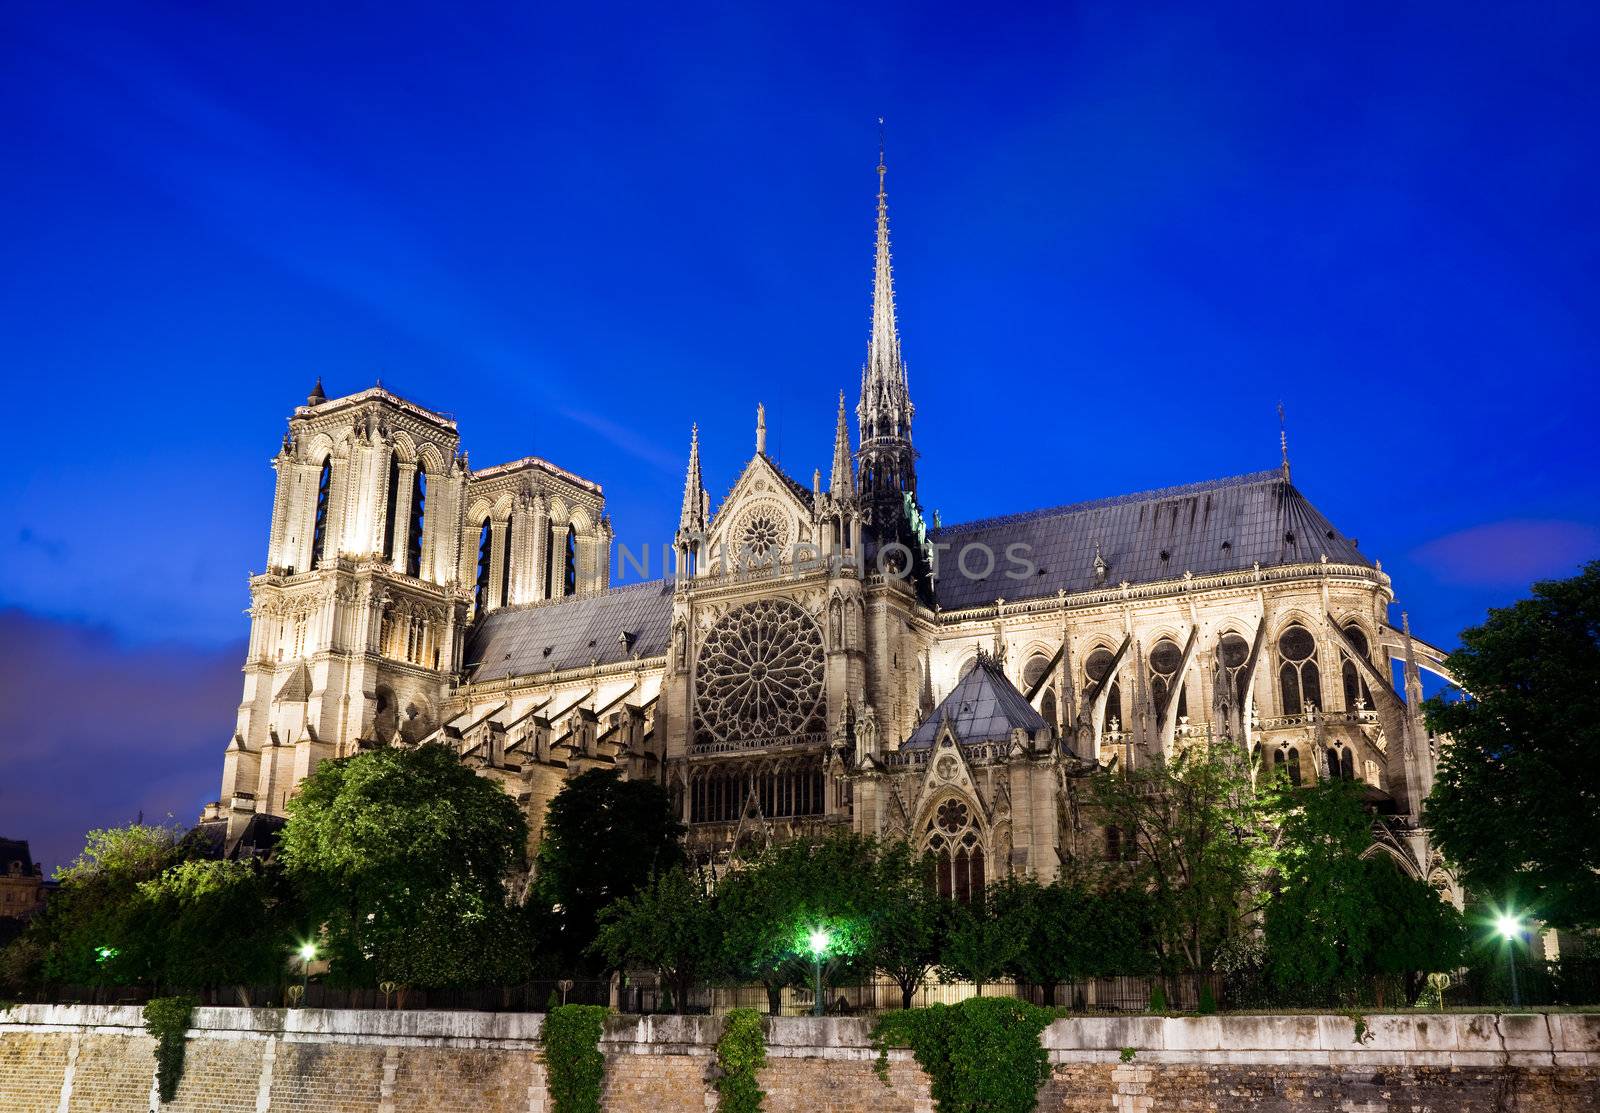 Notre Dame Cathedral in Paris France at night